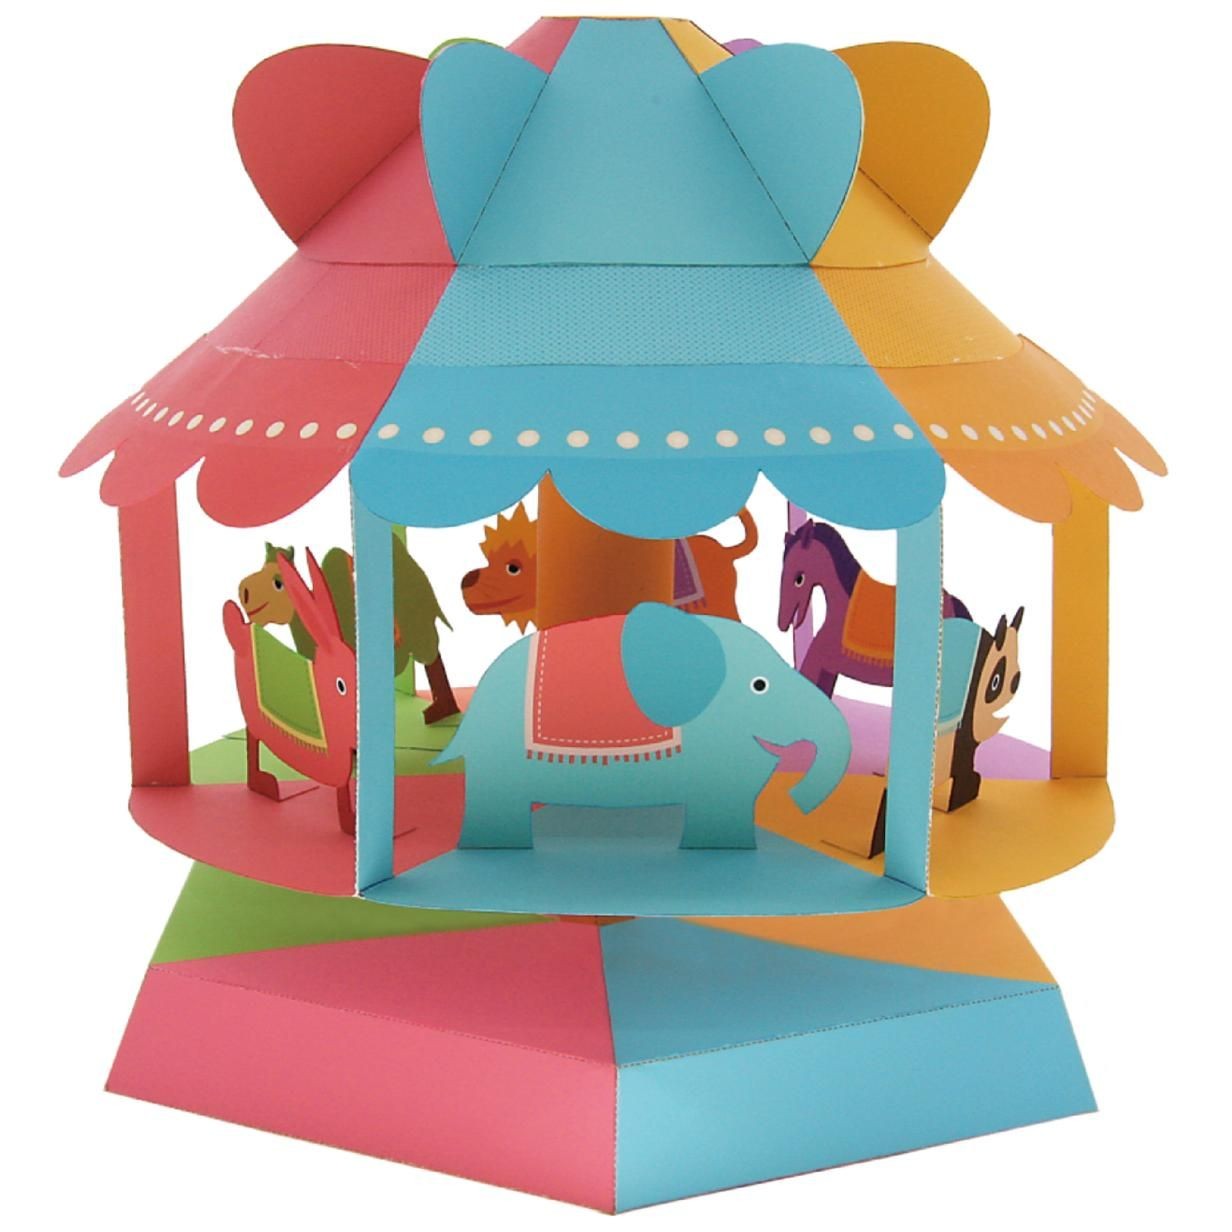 Canon Papercraft Animals Wind Powered Merry Go Round toys Paper Craft Educational Rabbit